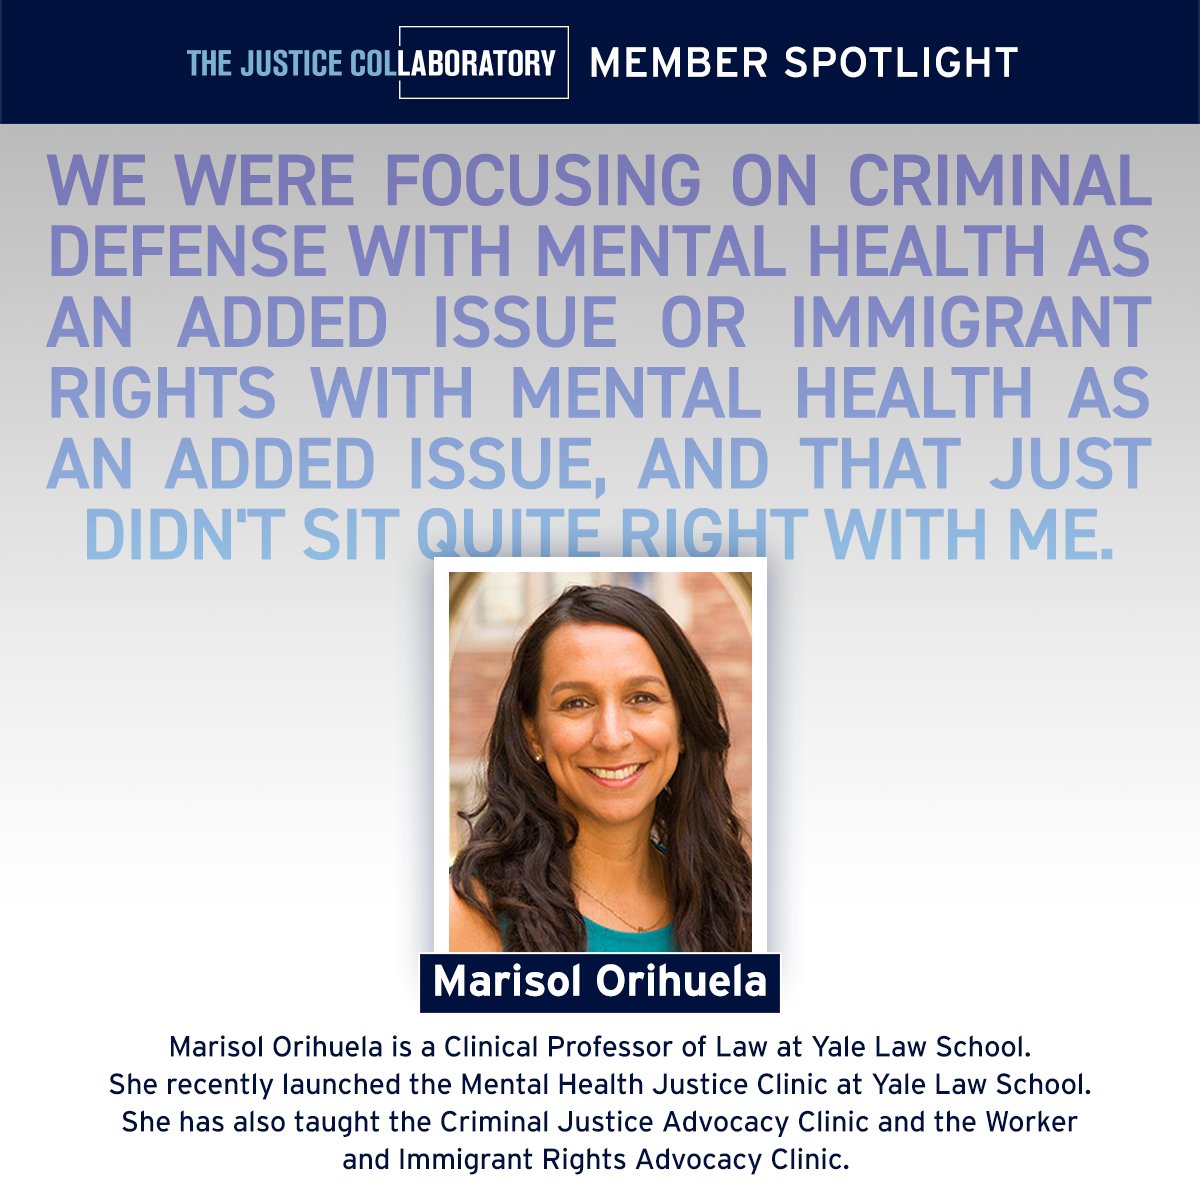 In our latest Member Spotlight, we talk to Professor Marisol Orihuela about the Mental Health Justice Clinic at Yale Law School. @MsolOG @YaleLawSch bit.ly/431tRxb